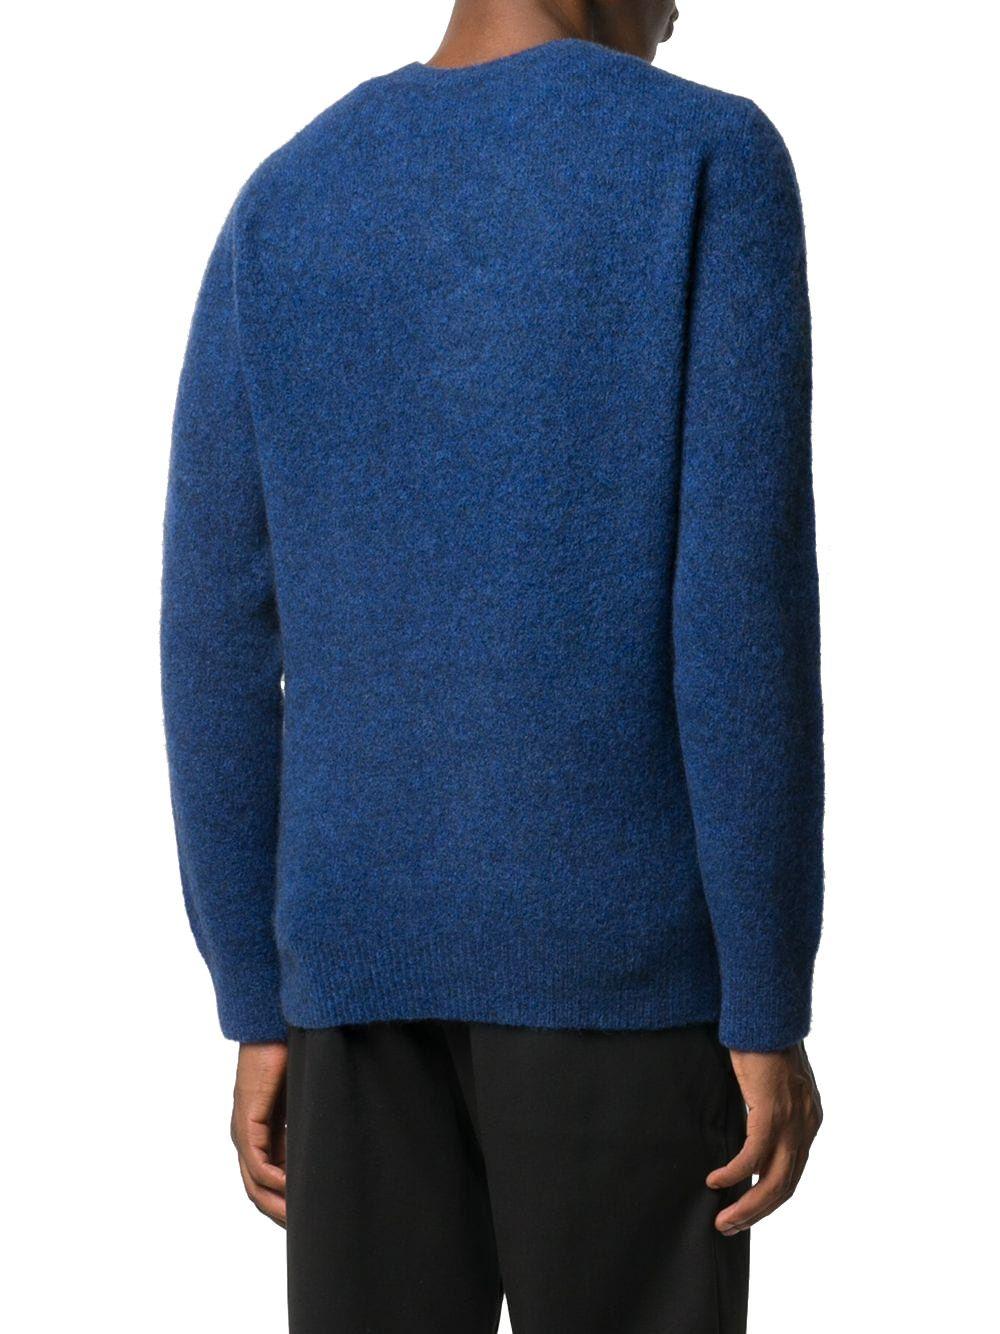 A.P.C. Wool Sweater in Blue for Men - Lyst